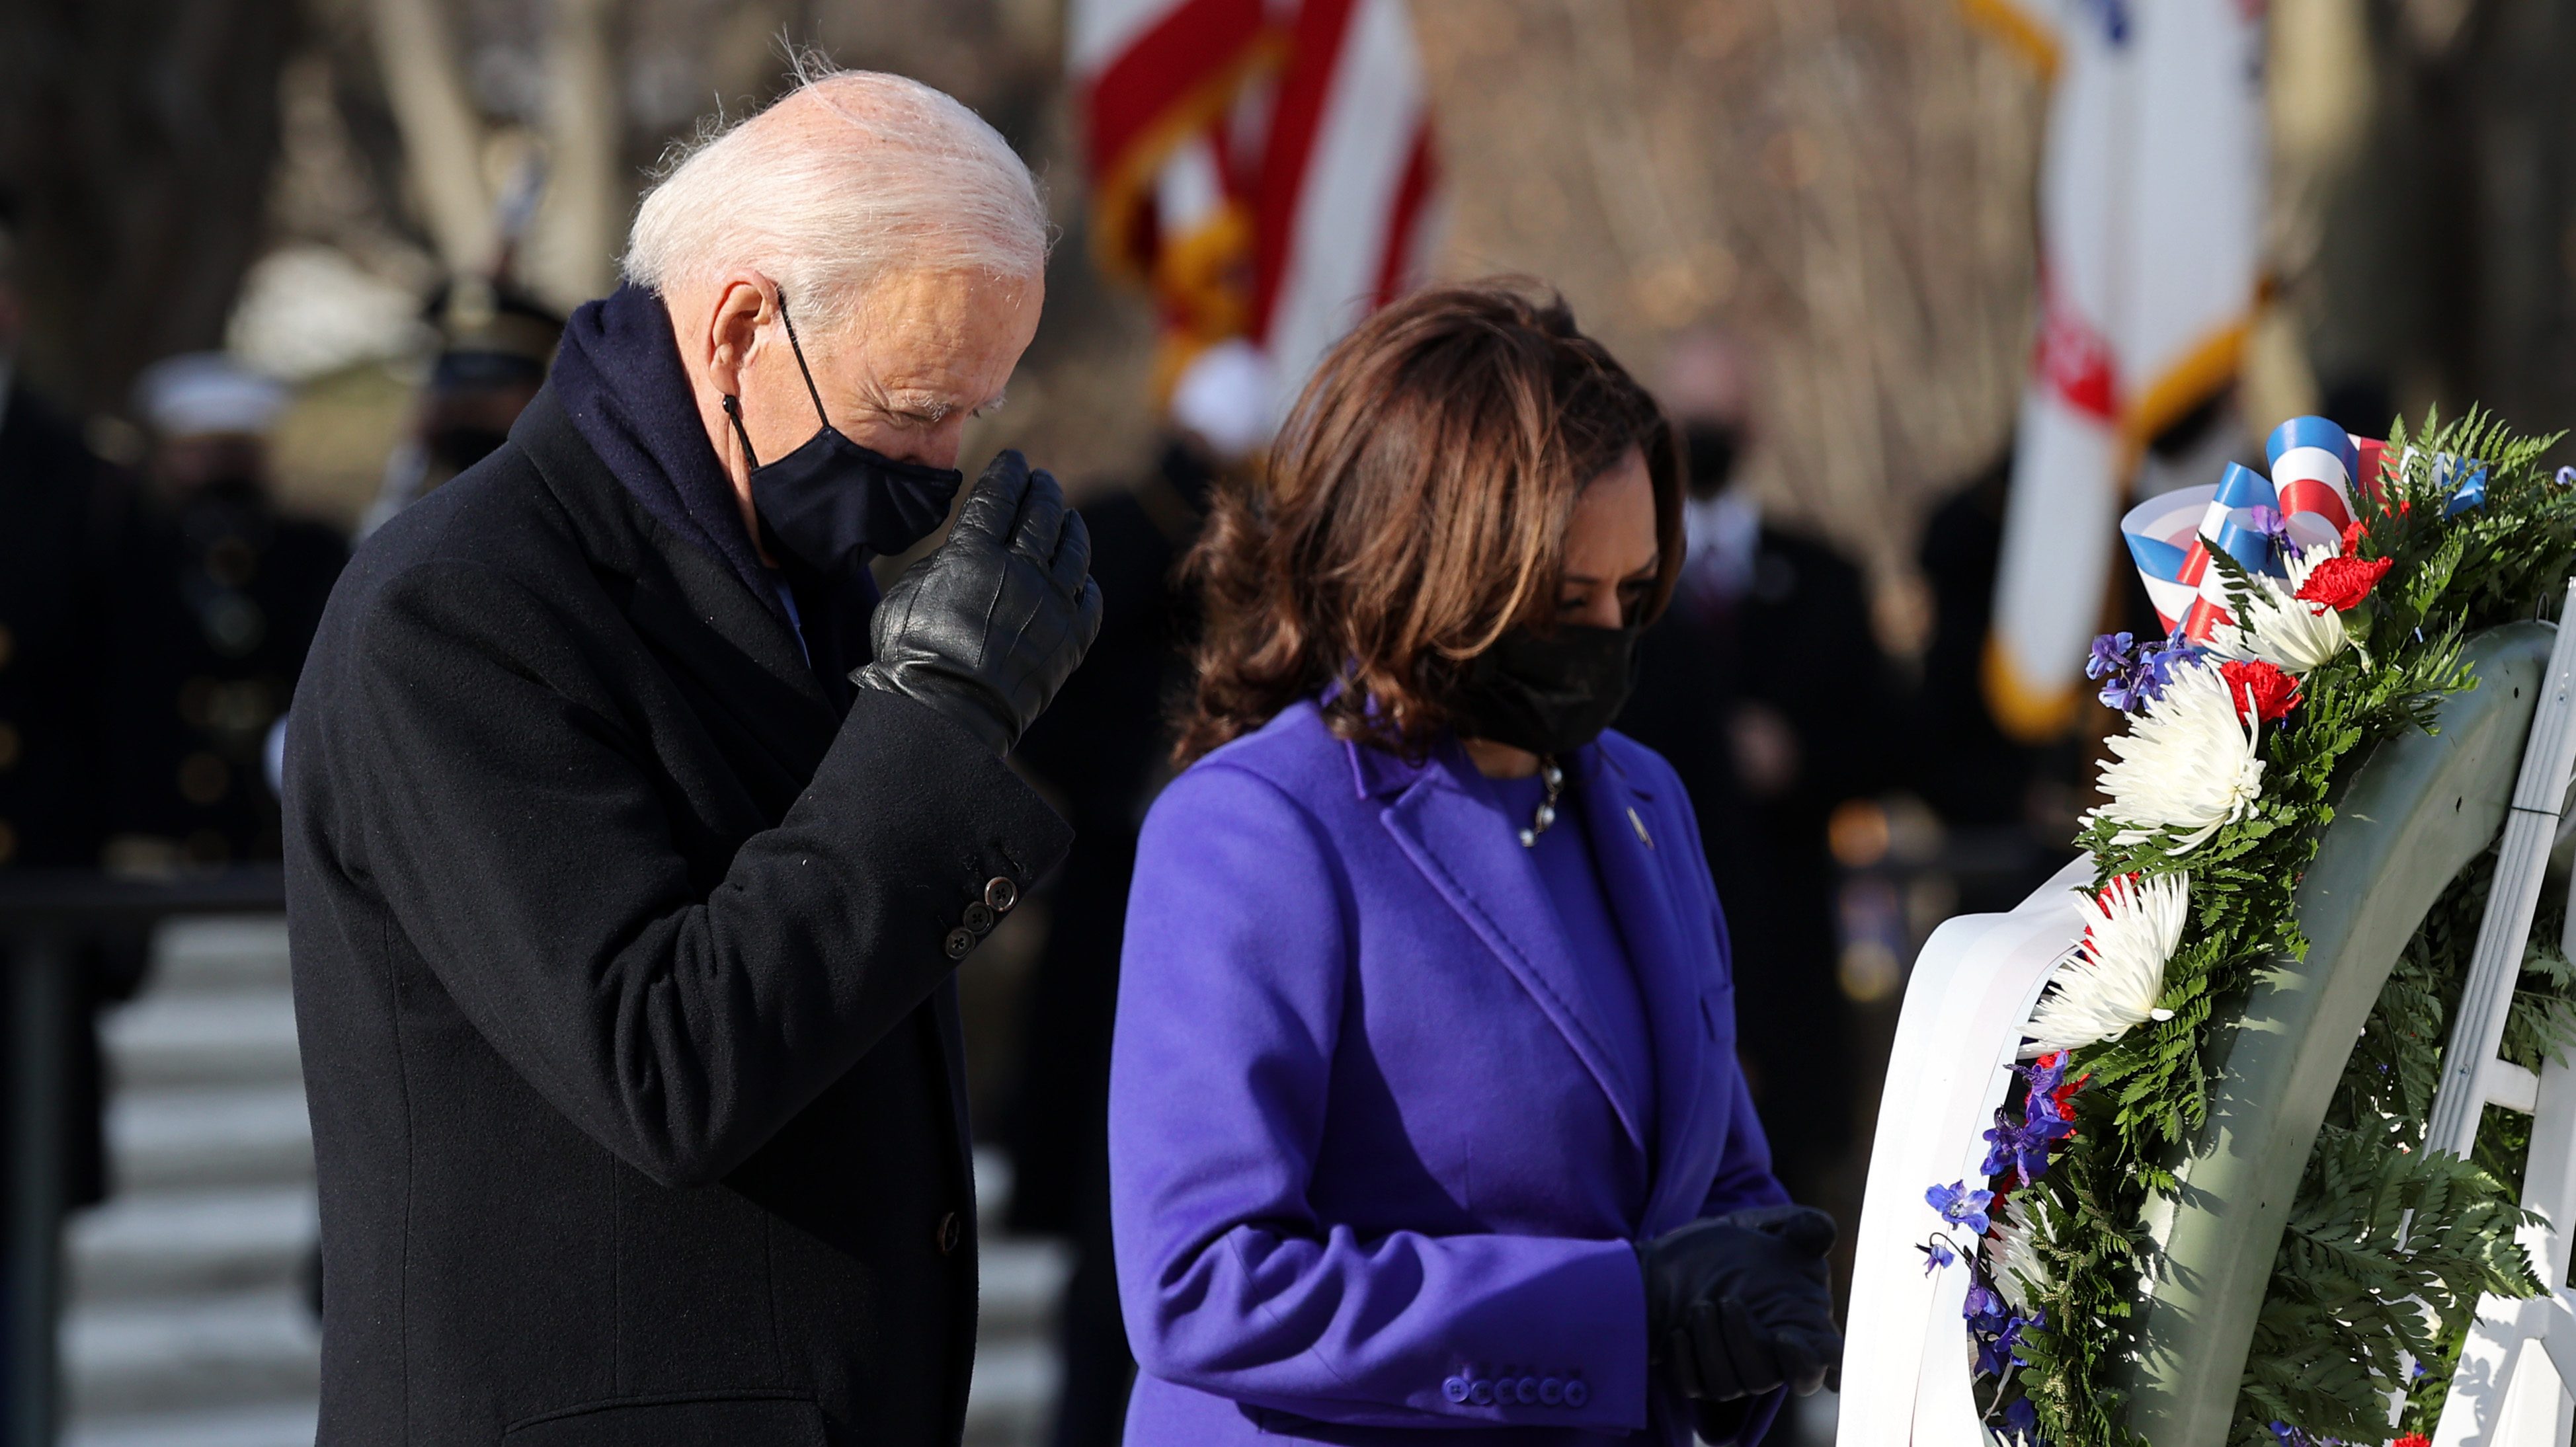 President Joe Biden and Vice President Kamala Harris attend a wreath-laying ceremony at Arlington National Cemetery's Tomb of the Unknown Soldier after the 59th Presidential Inauguration ceremony at the U.S. Capitol, Jan. 20, 2021 in Arlington, Virginia. (Chip Somodevilla/Getty Images)